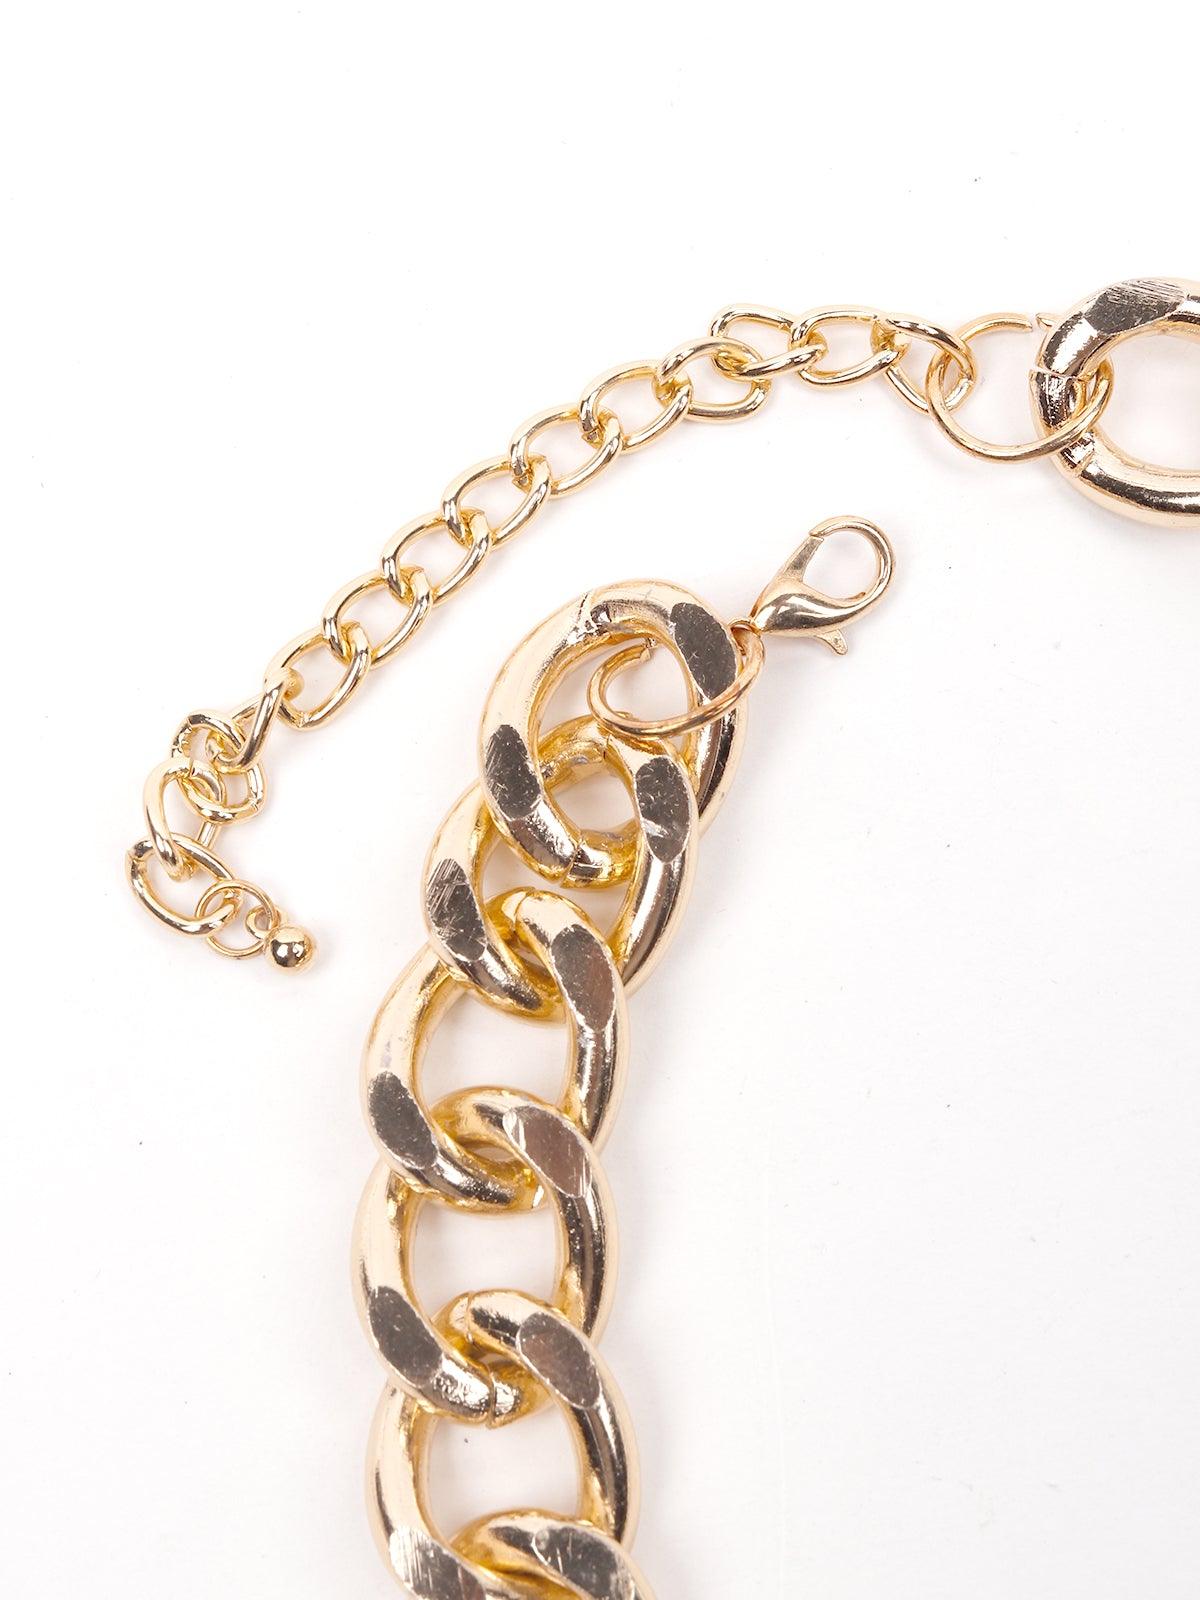 Women's Stunning Interlinked Gold Chain With White Stones Embedded. - Odette